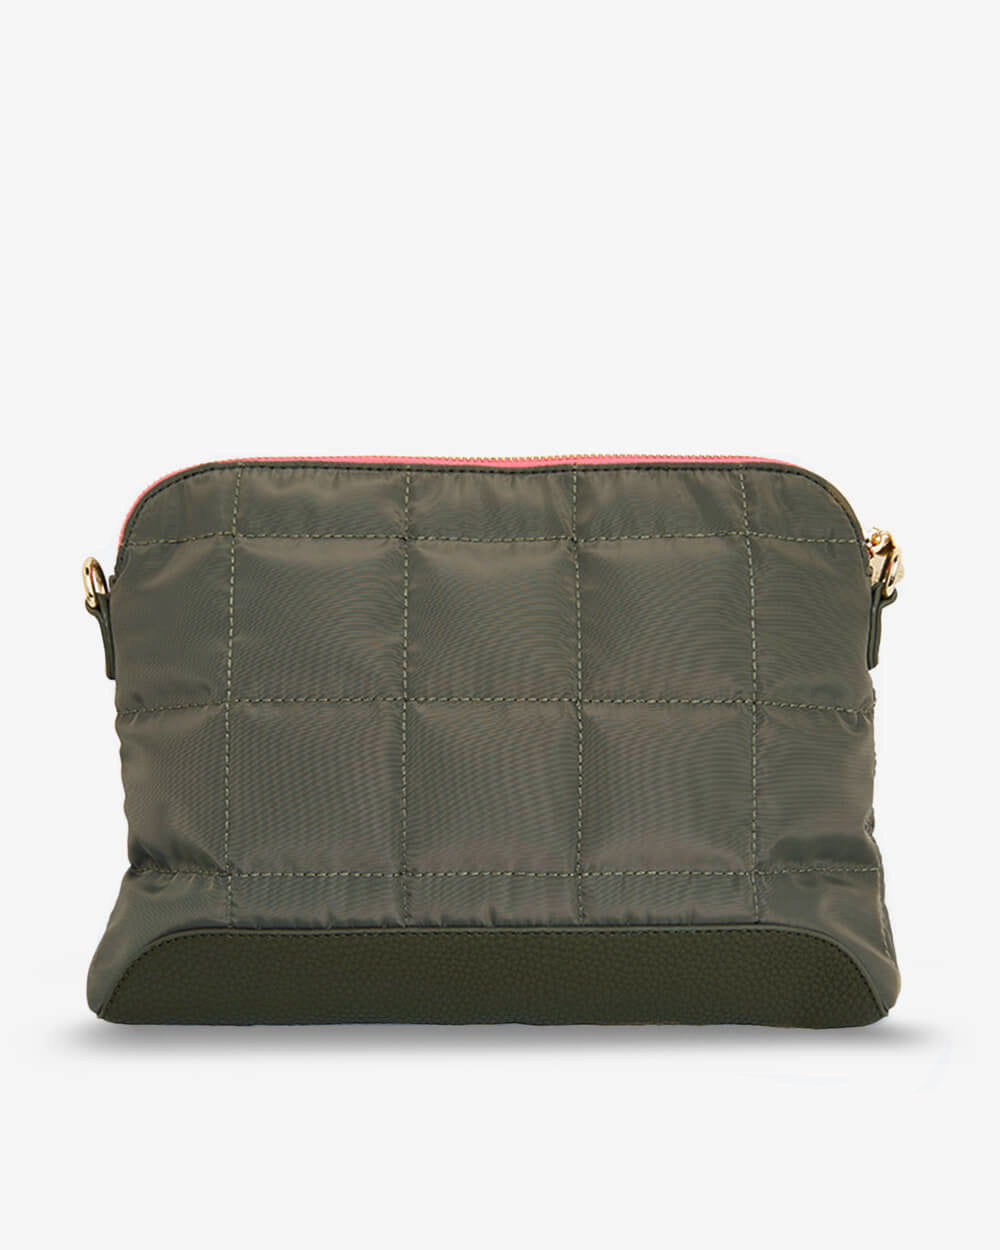 The $25 Target Purse That Looks Like A Luxury Bag | HuffPost Life